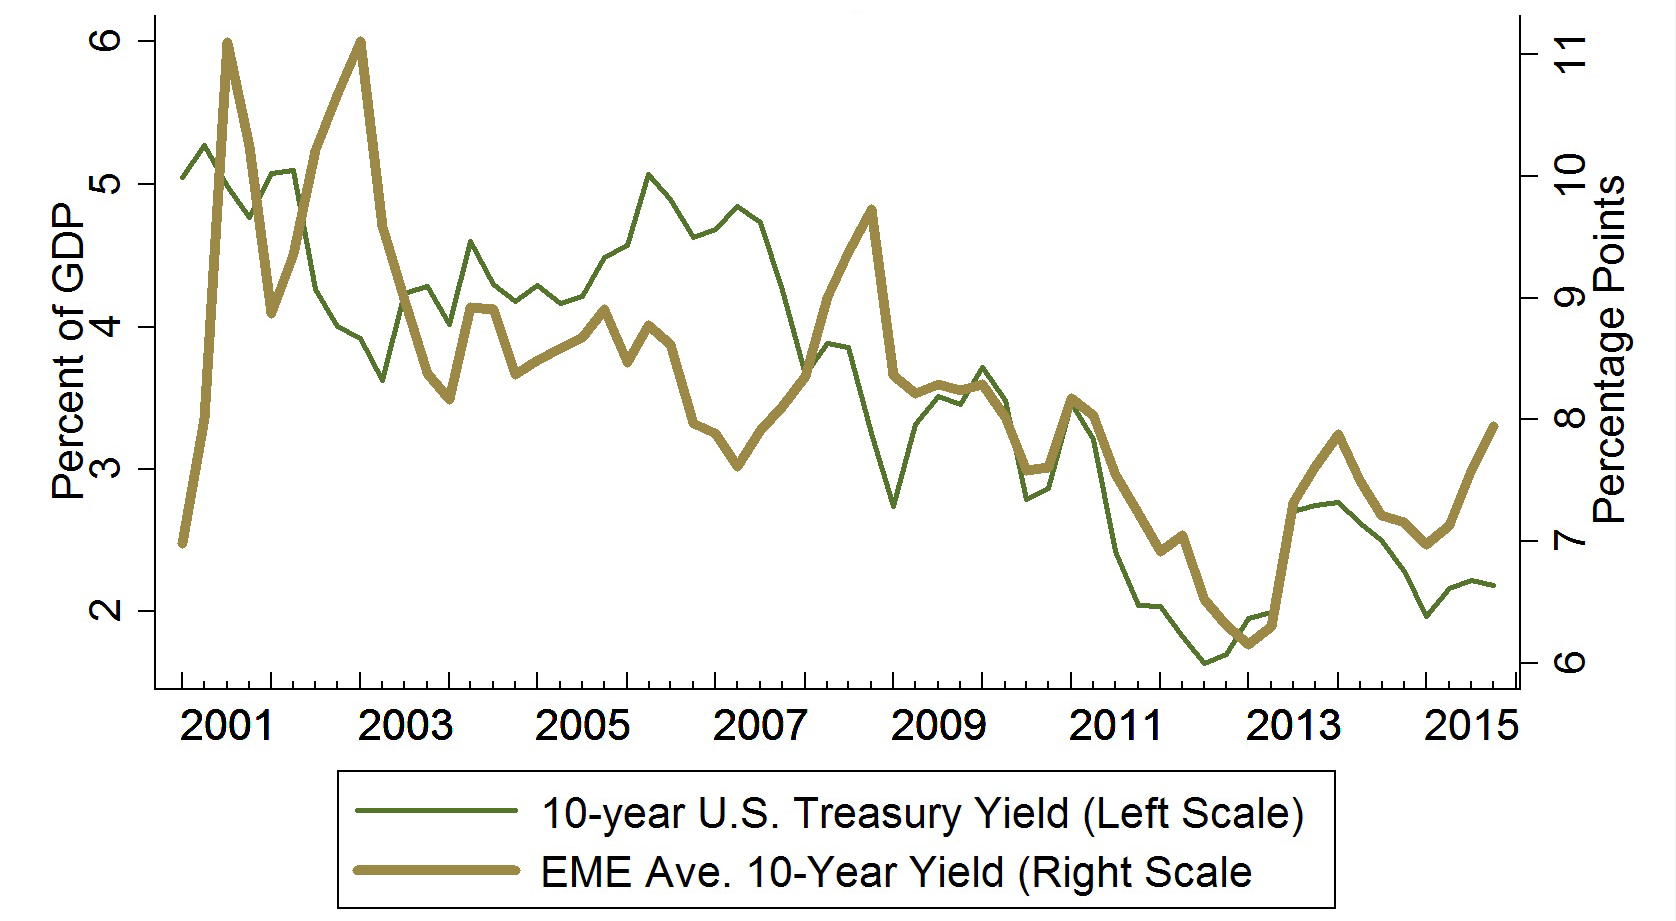 Chart 6: U.S. 10-Year Treasury Yields and EME Long Term Yields. See accessible link for data.